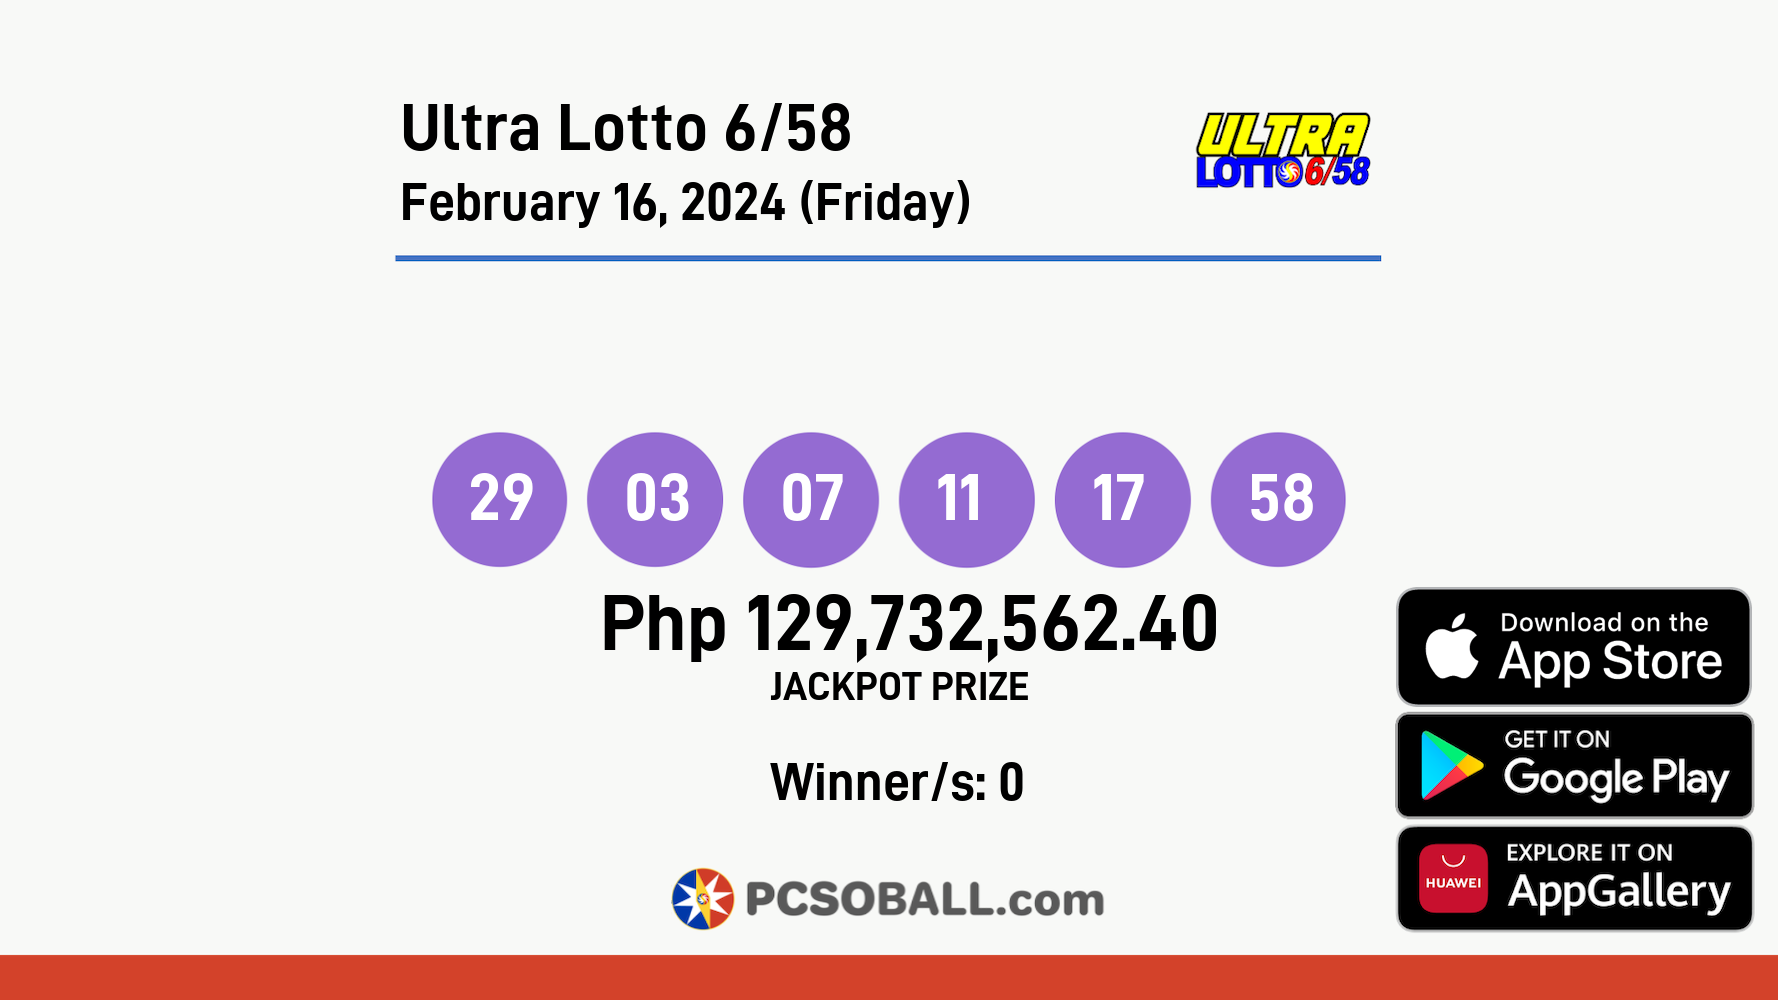 Ultra Lotto 6/58 February 16, 2024 (Friday) Result